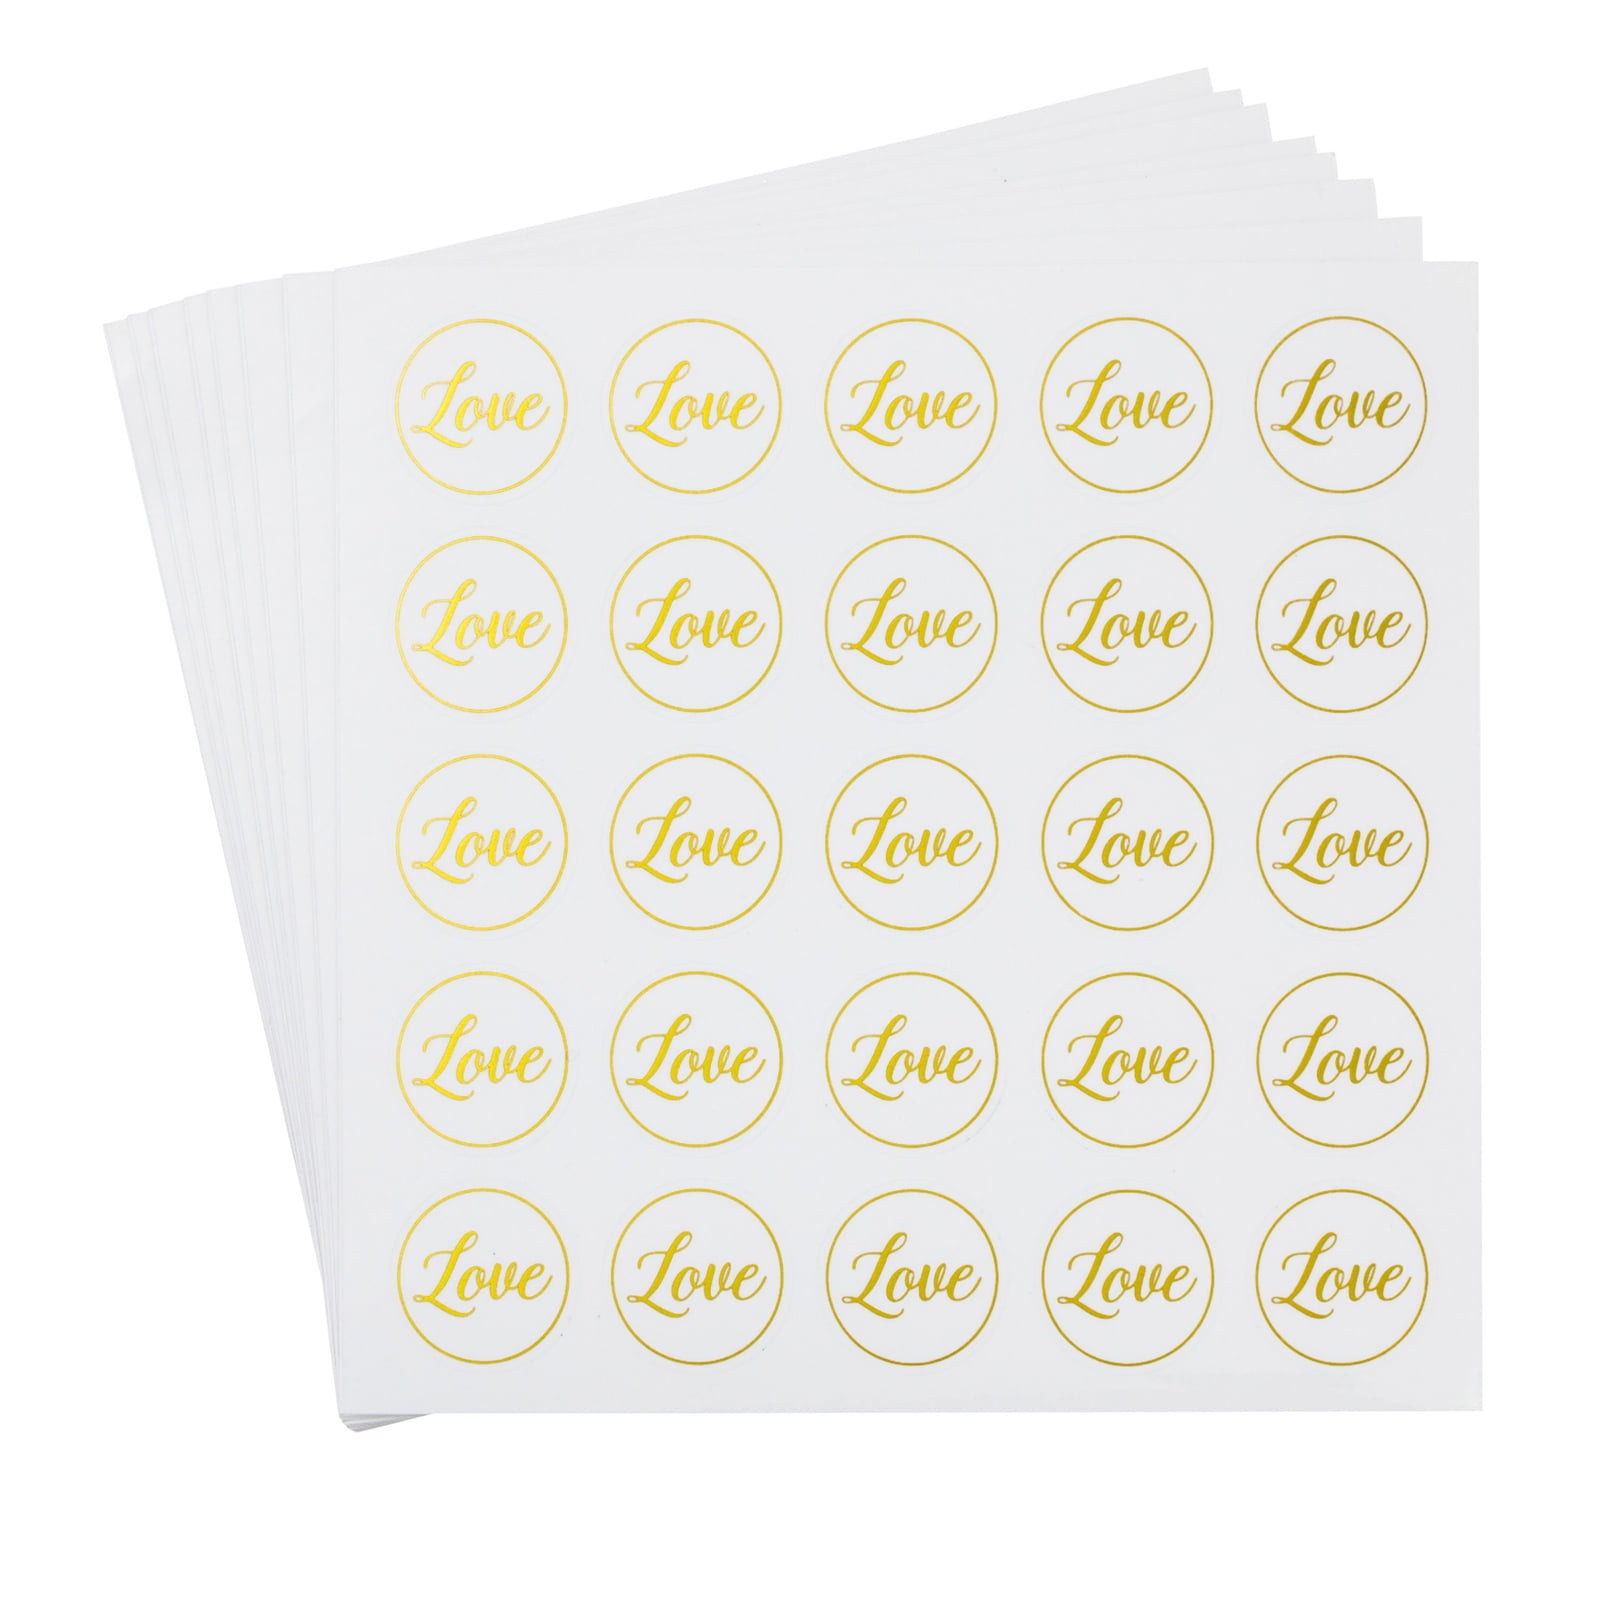  Clear Transparent Custom Text Label Stickers with Real Gold Foil.  Personalized Labels write your own text. Rose Gold & Silver. Different  Sizes. : Handmade Products